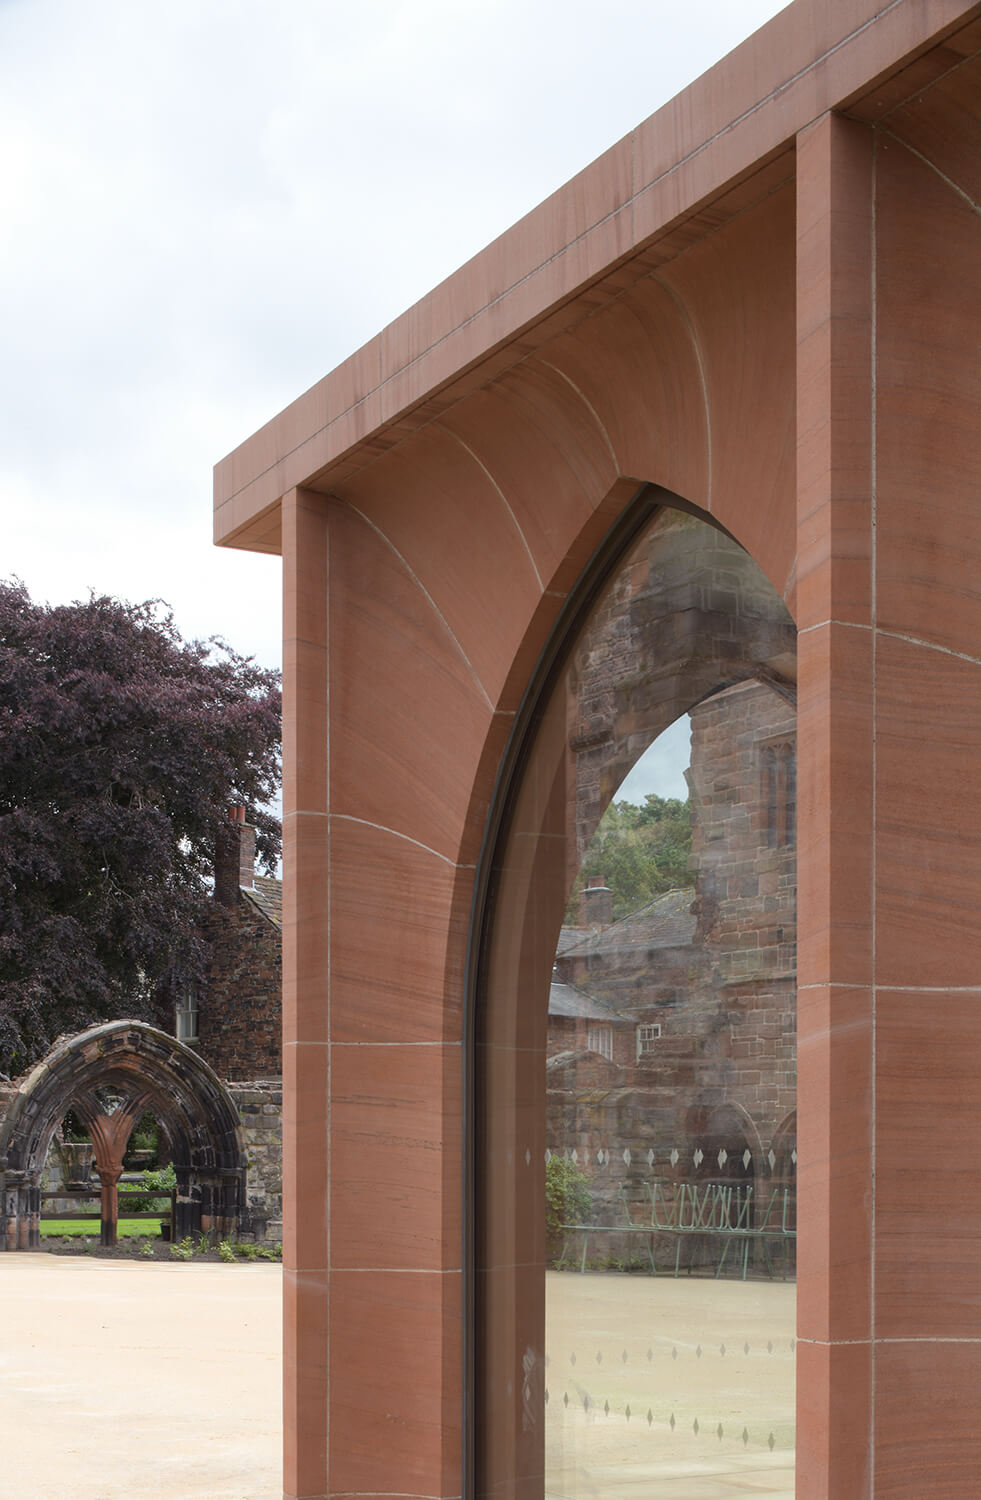 Detail shot of a red sandstone arch